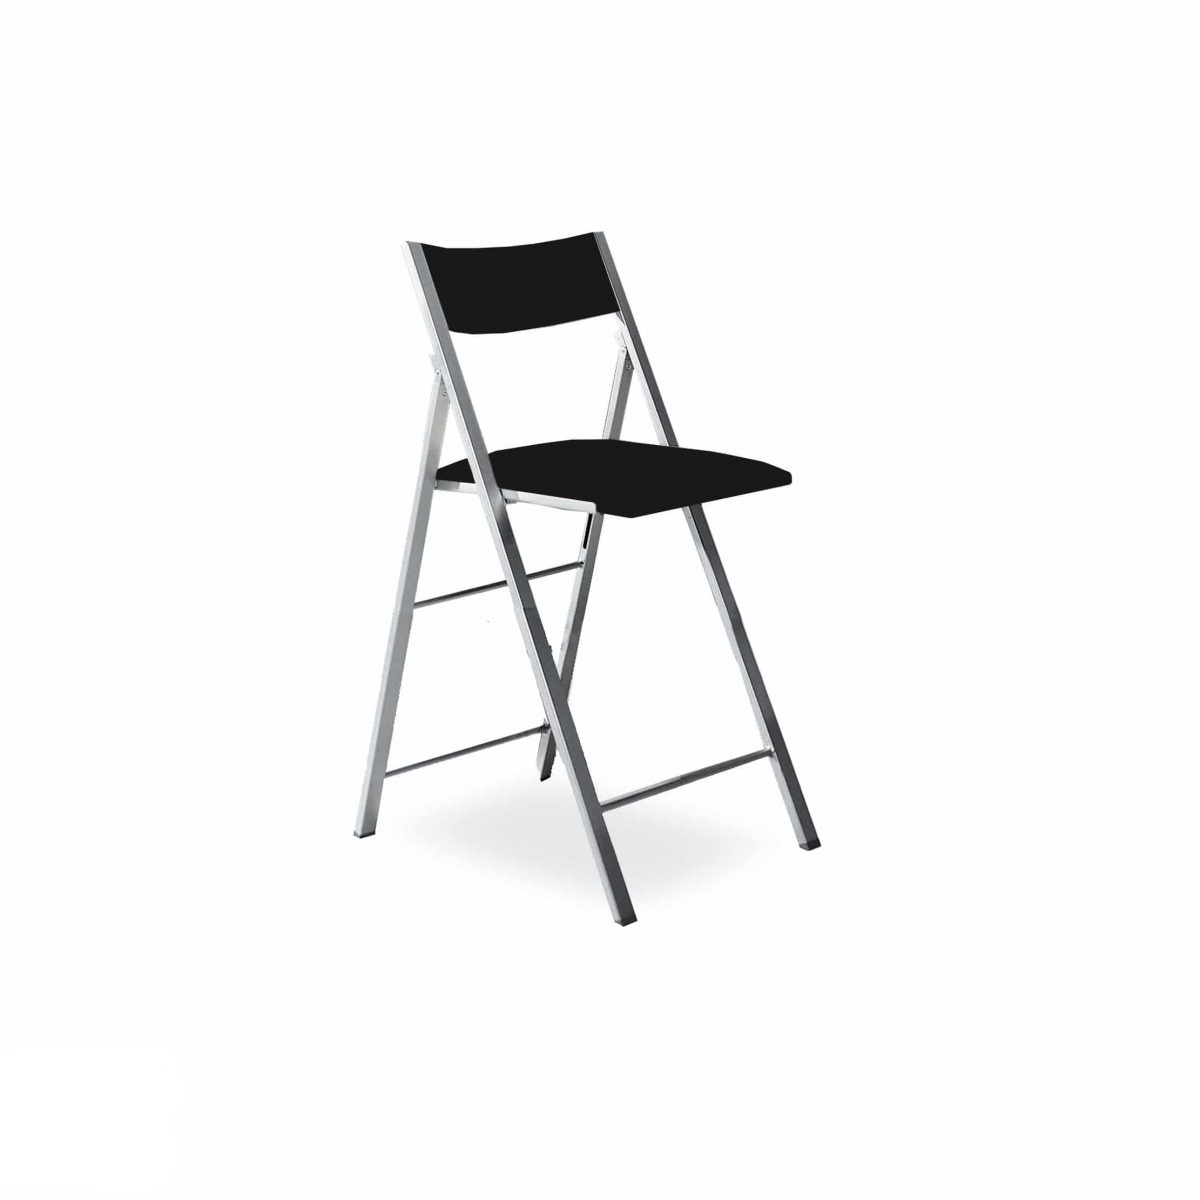 Nano Counter Height Folding Chair In Black Wood 1 1200x1200 Cropped 